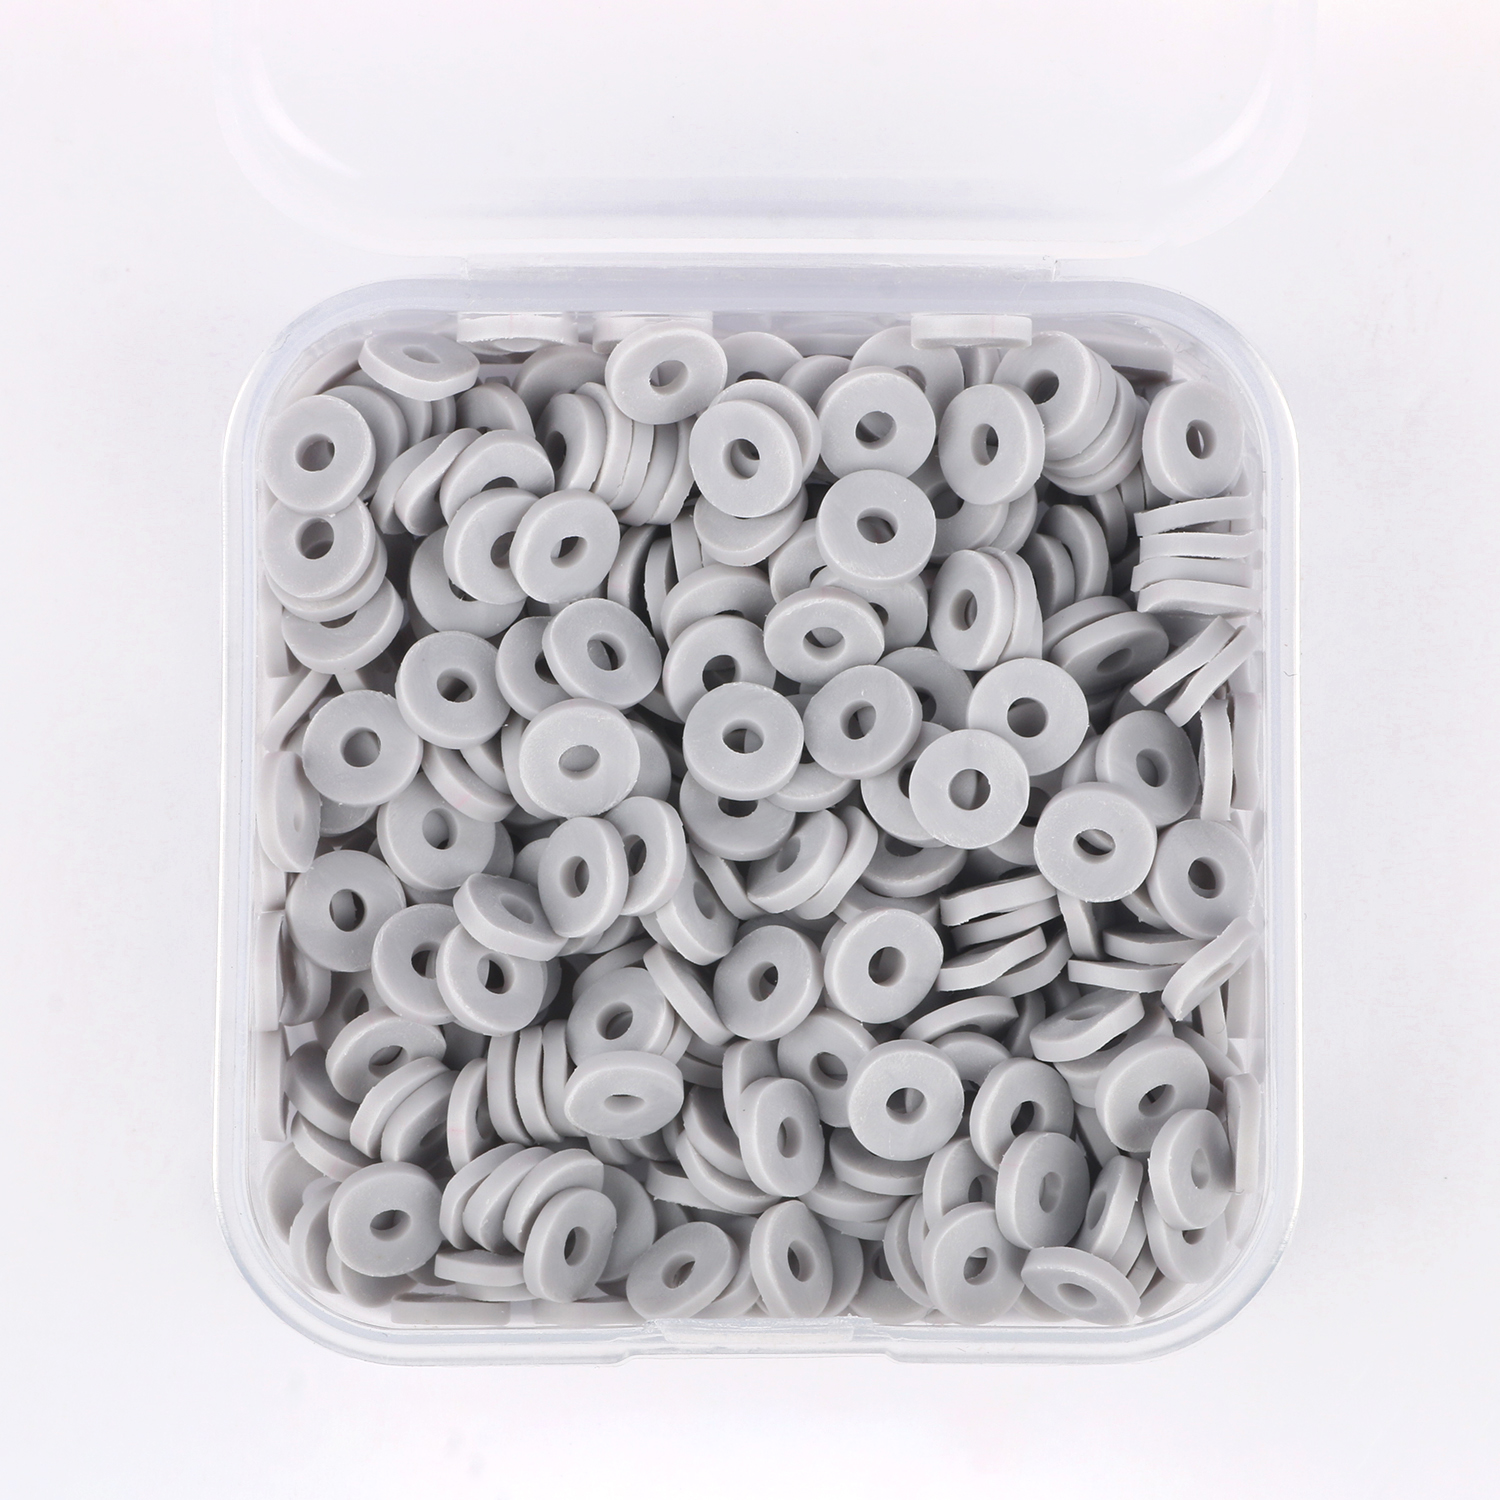 1000pcs 6mm Clay Beads with Box Package Black Polymer Clay Beads for  Bracelets Necklace Jewelry Making (Black)